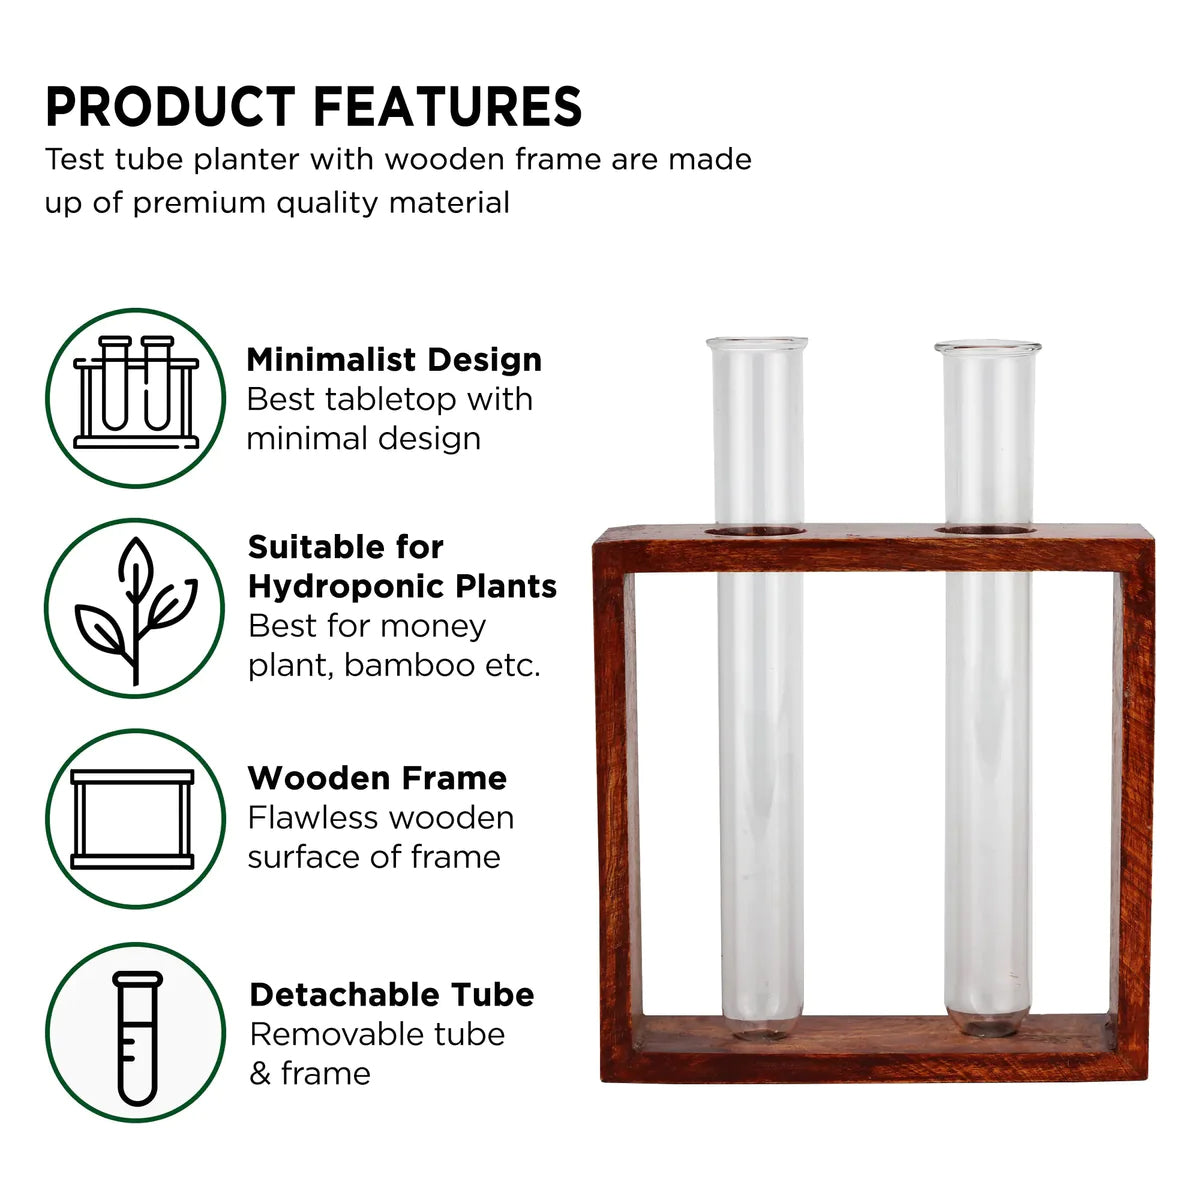 Casa De Amor Test Tube Planter with Wooden Holder for Office Table Top & Living Room Decoration